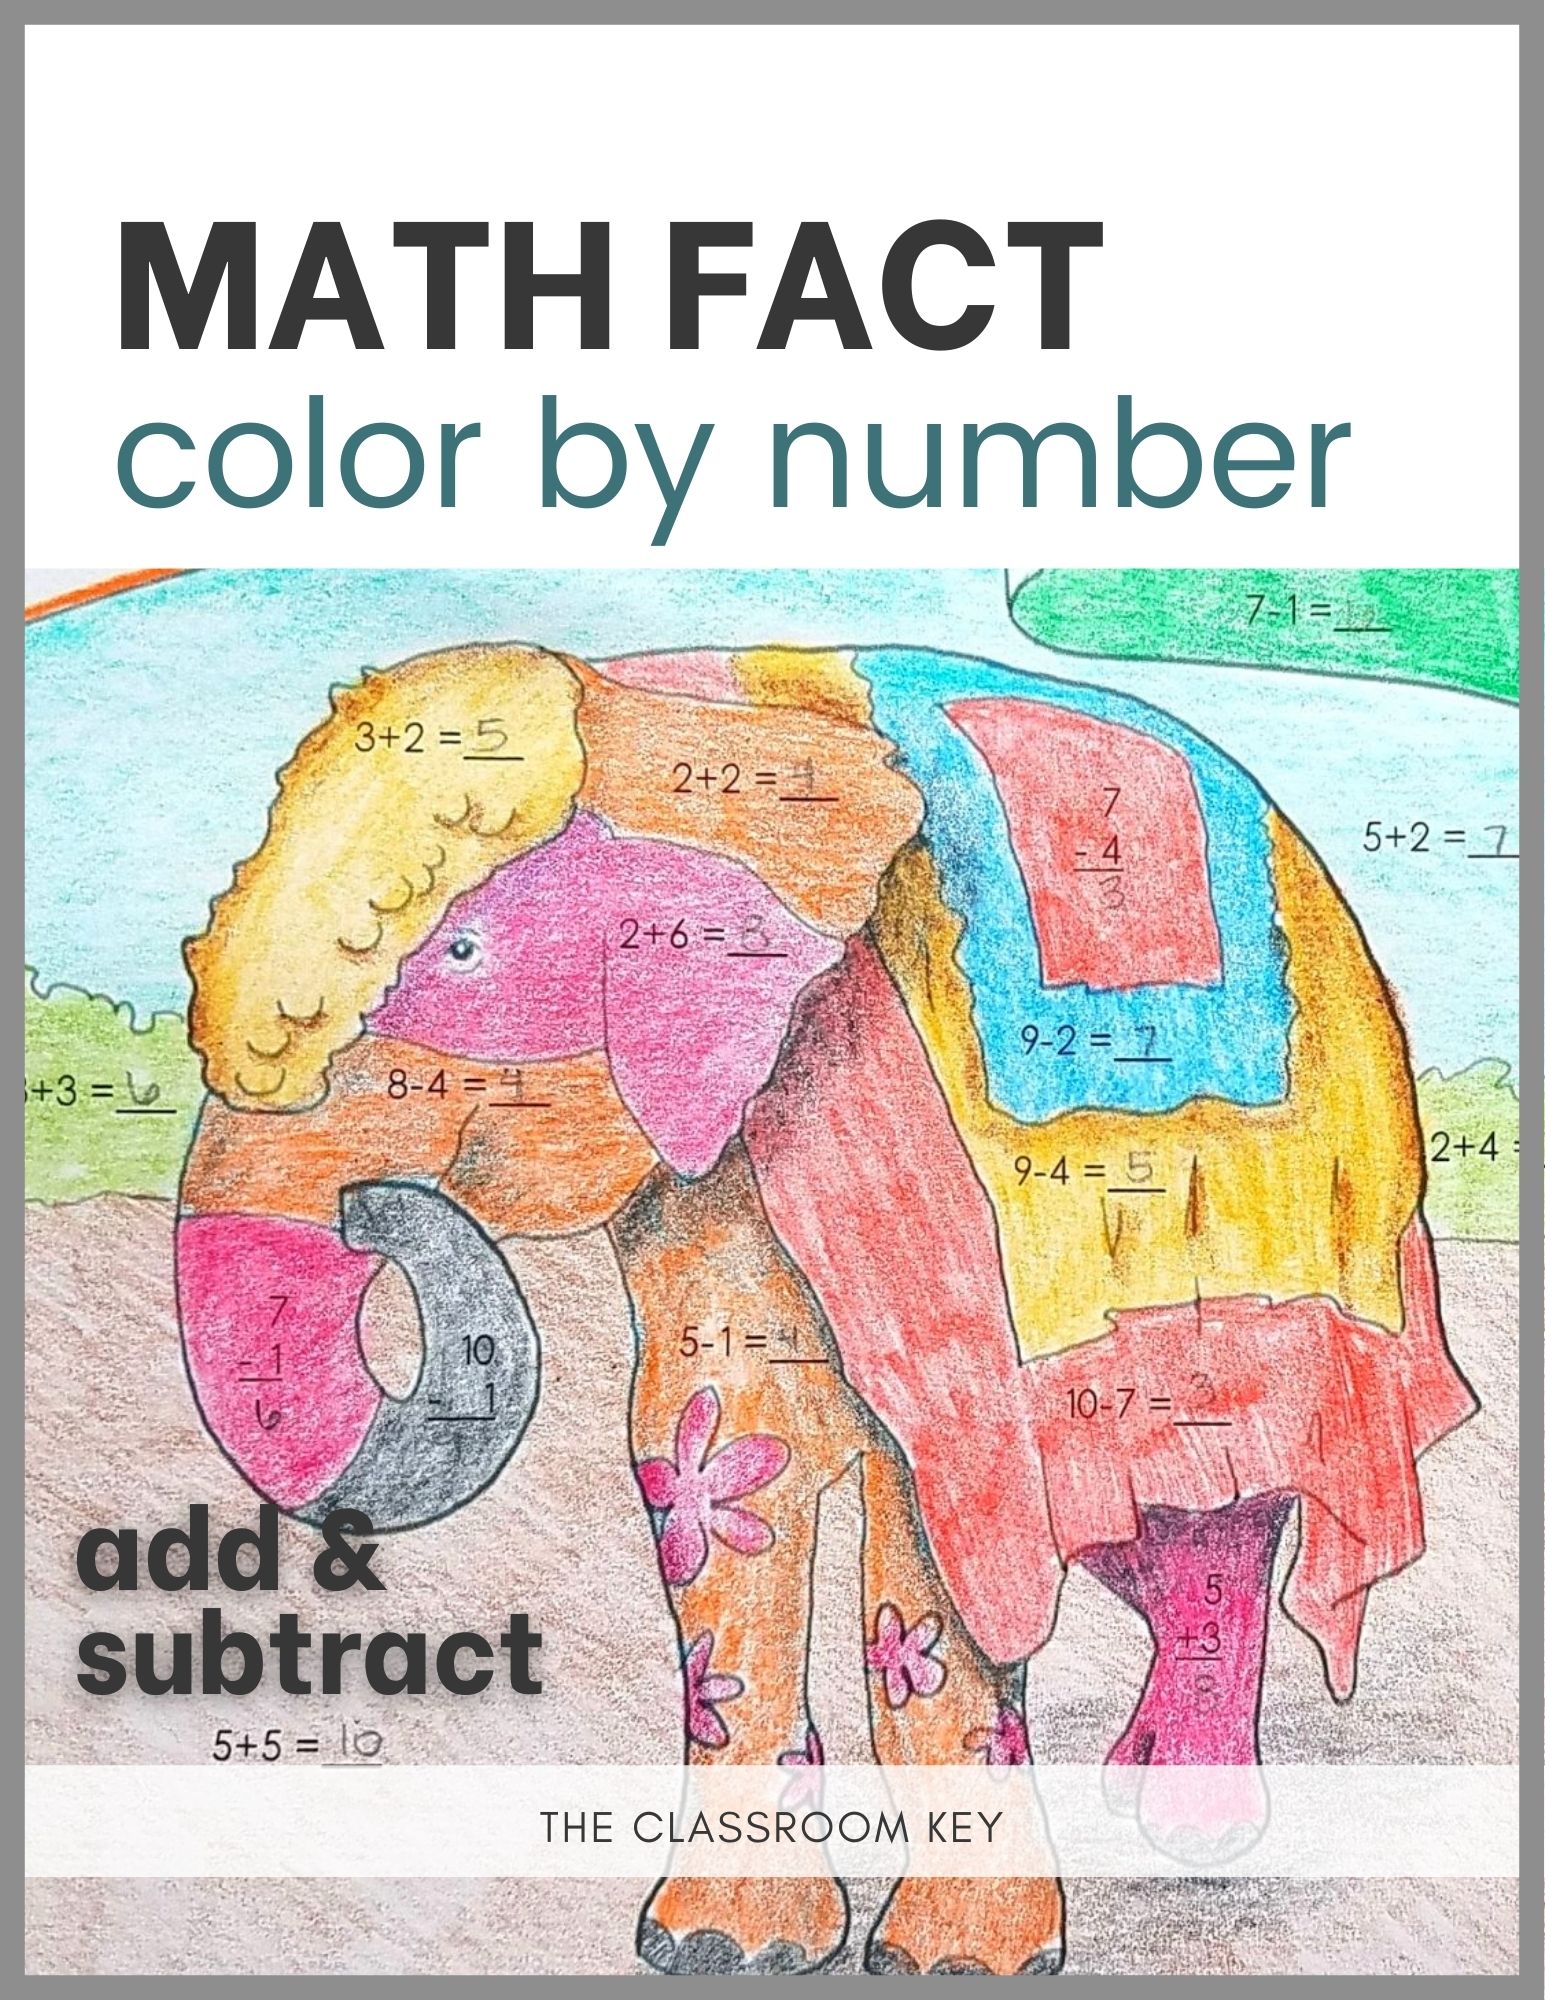 Addition and subtraction color by number activities